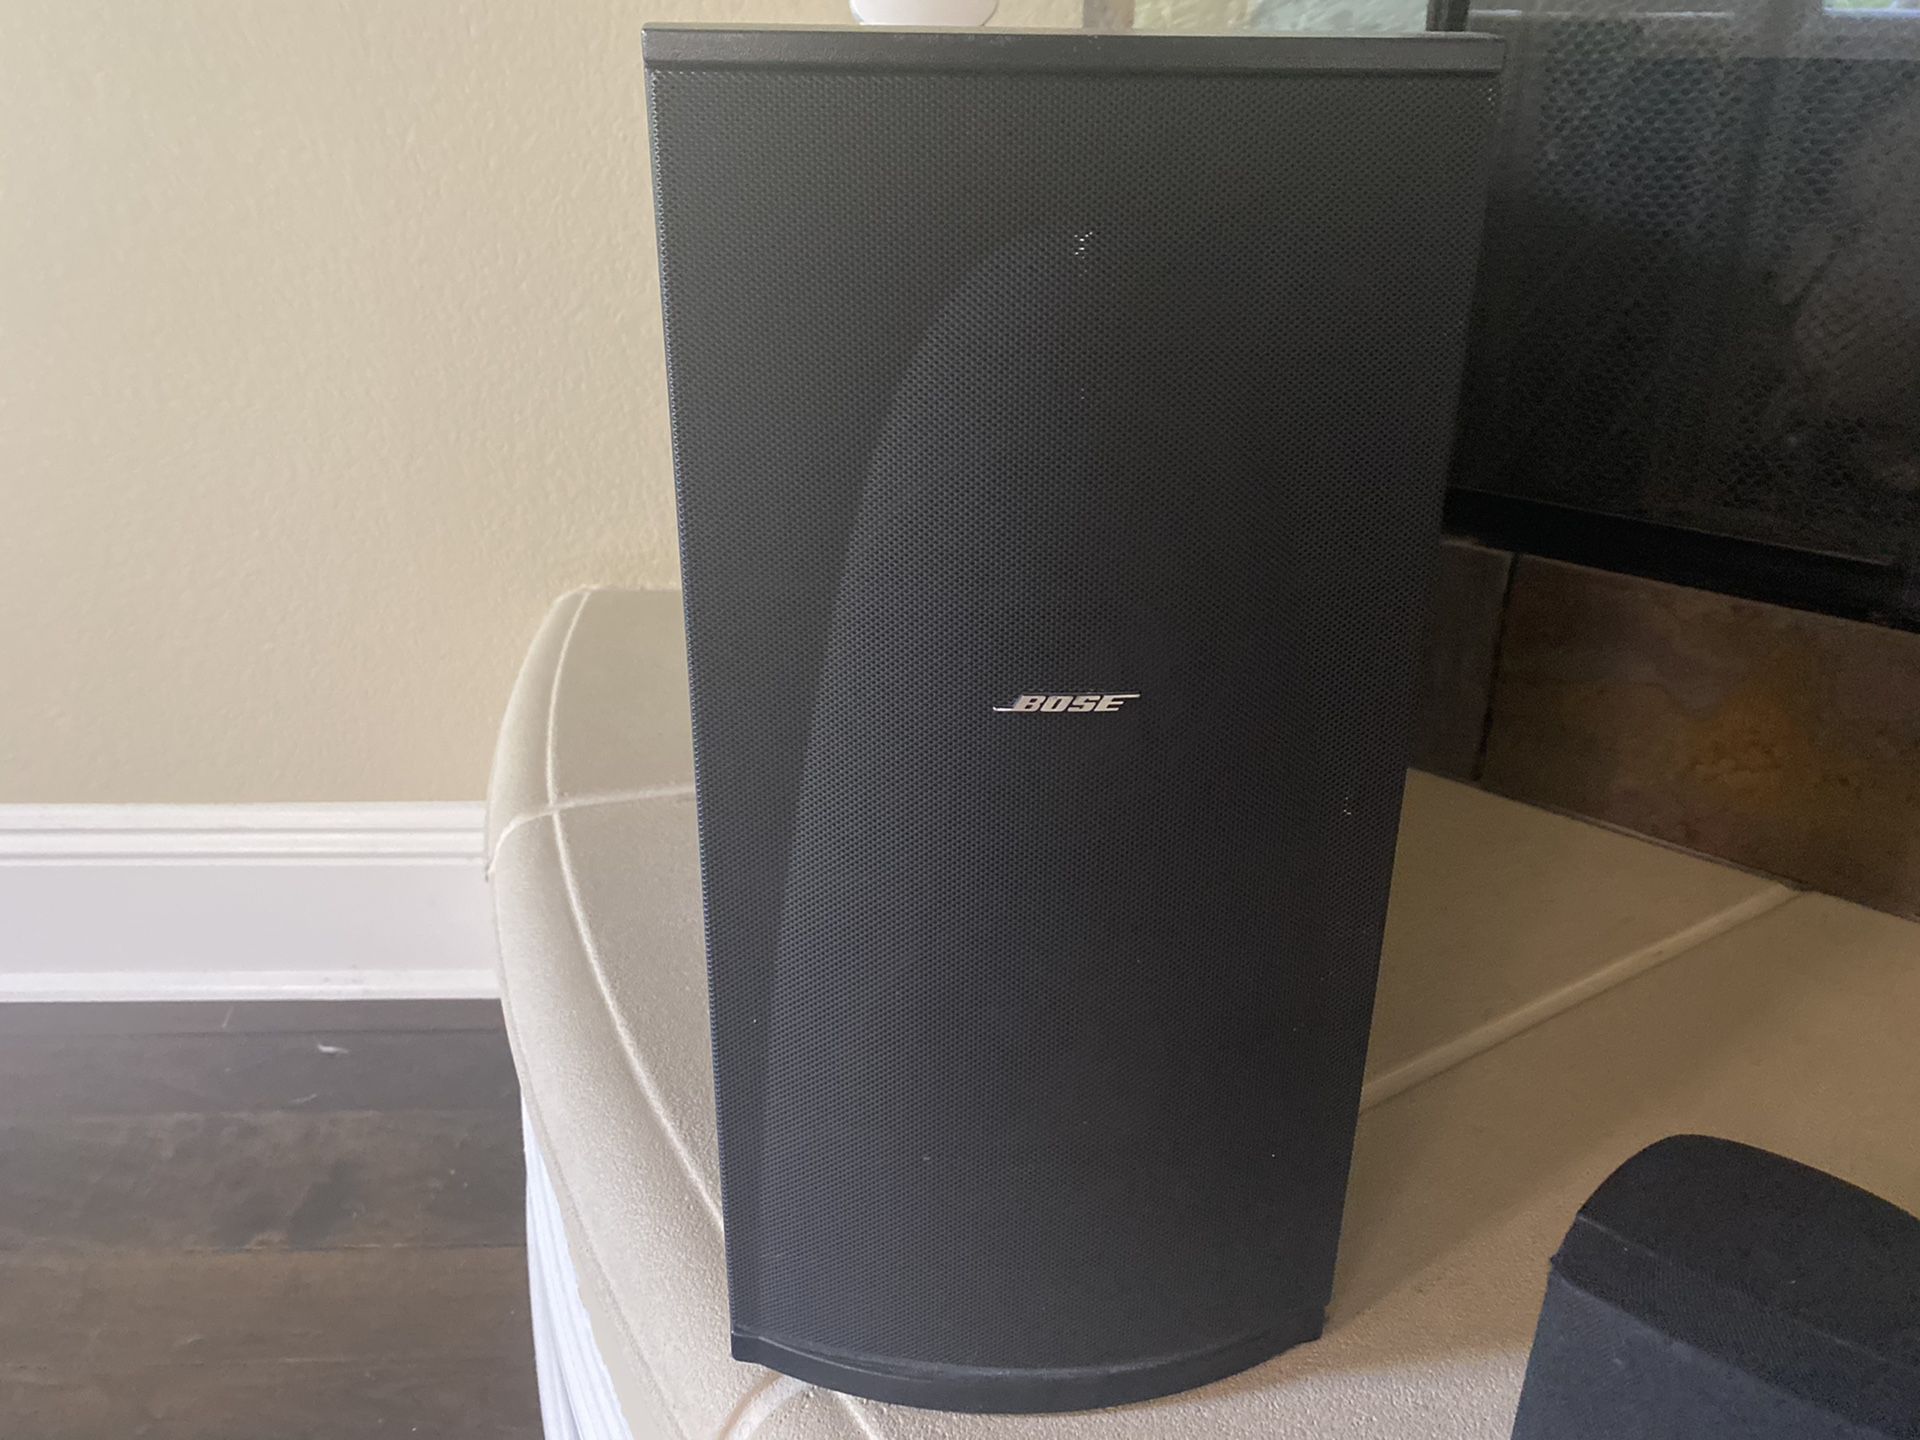 Bose lifestyle media center and surround sound system